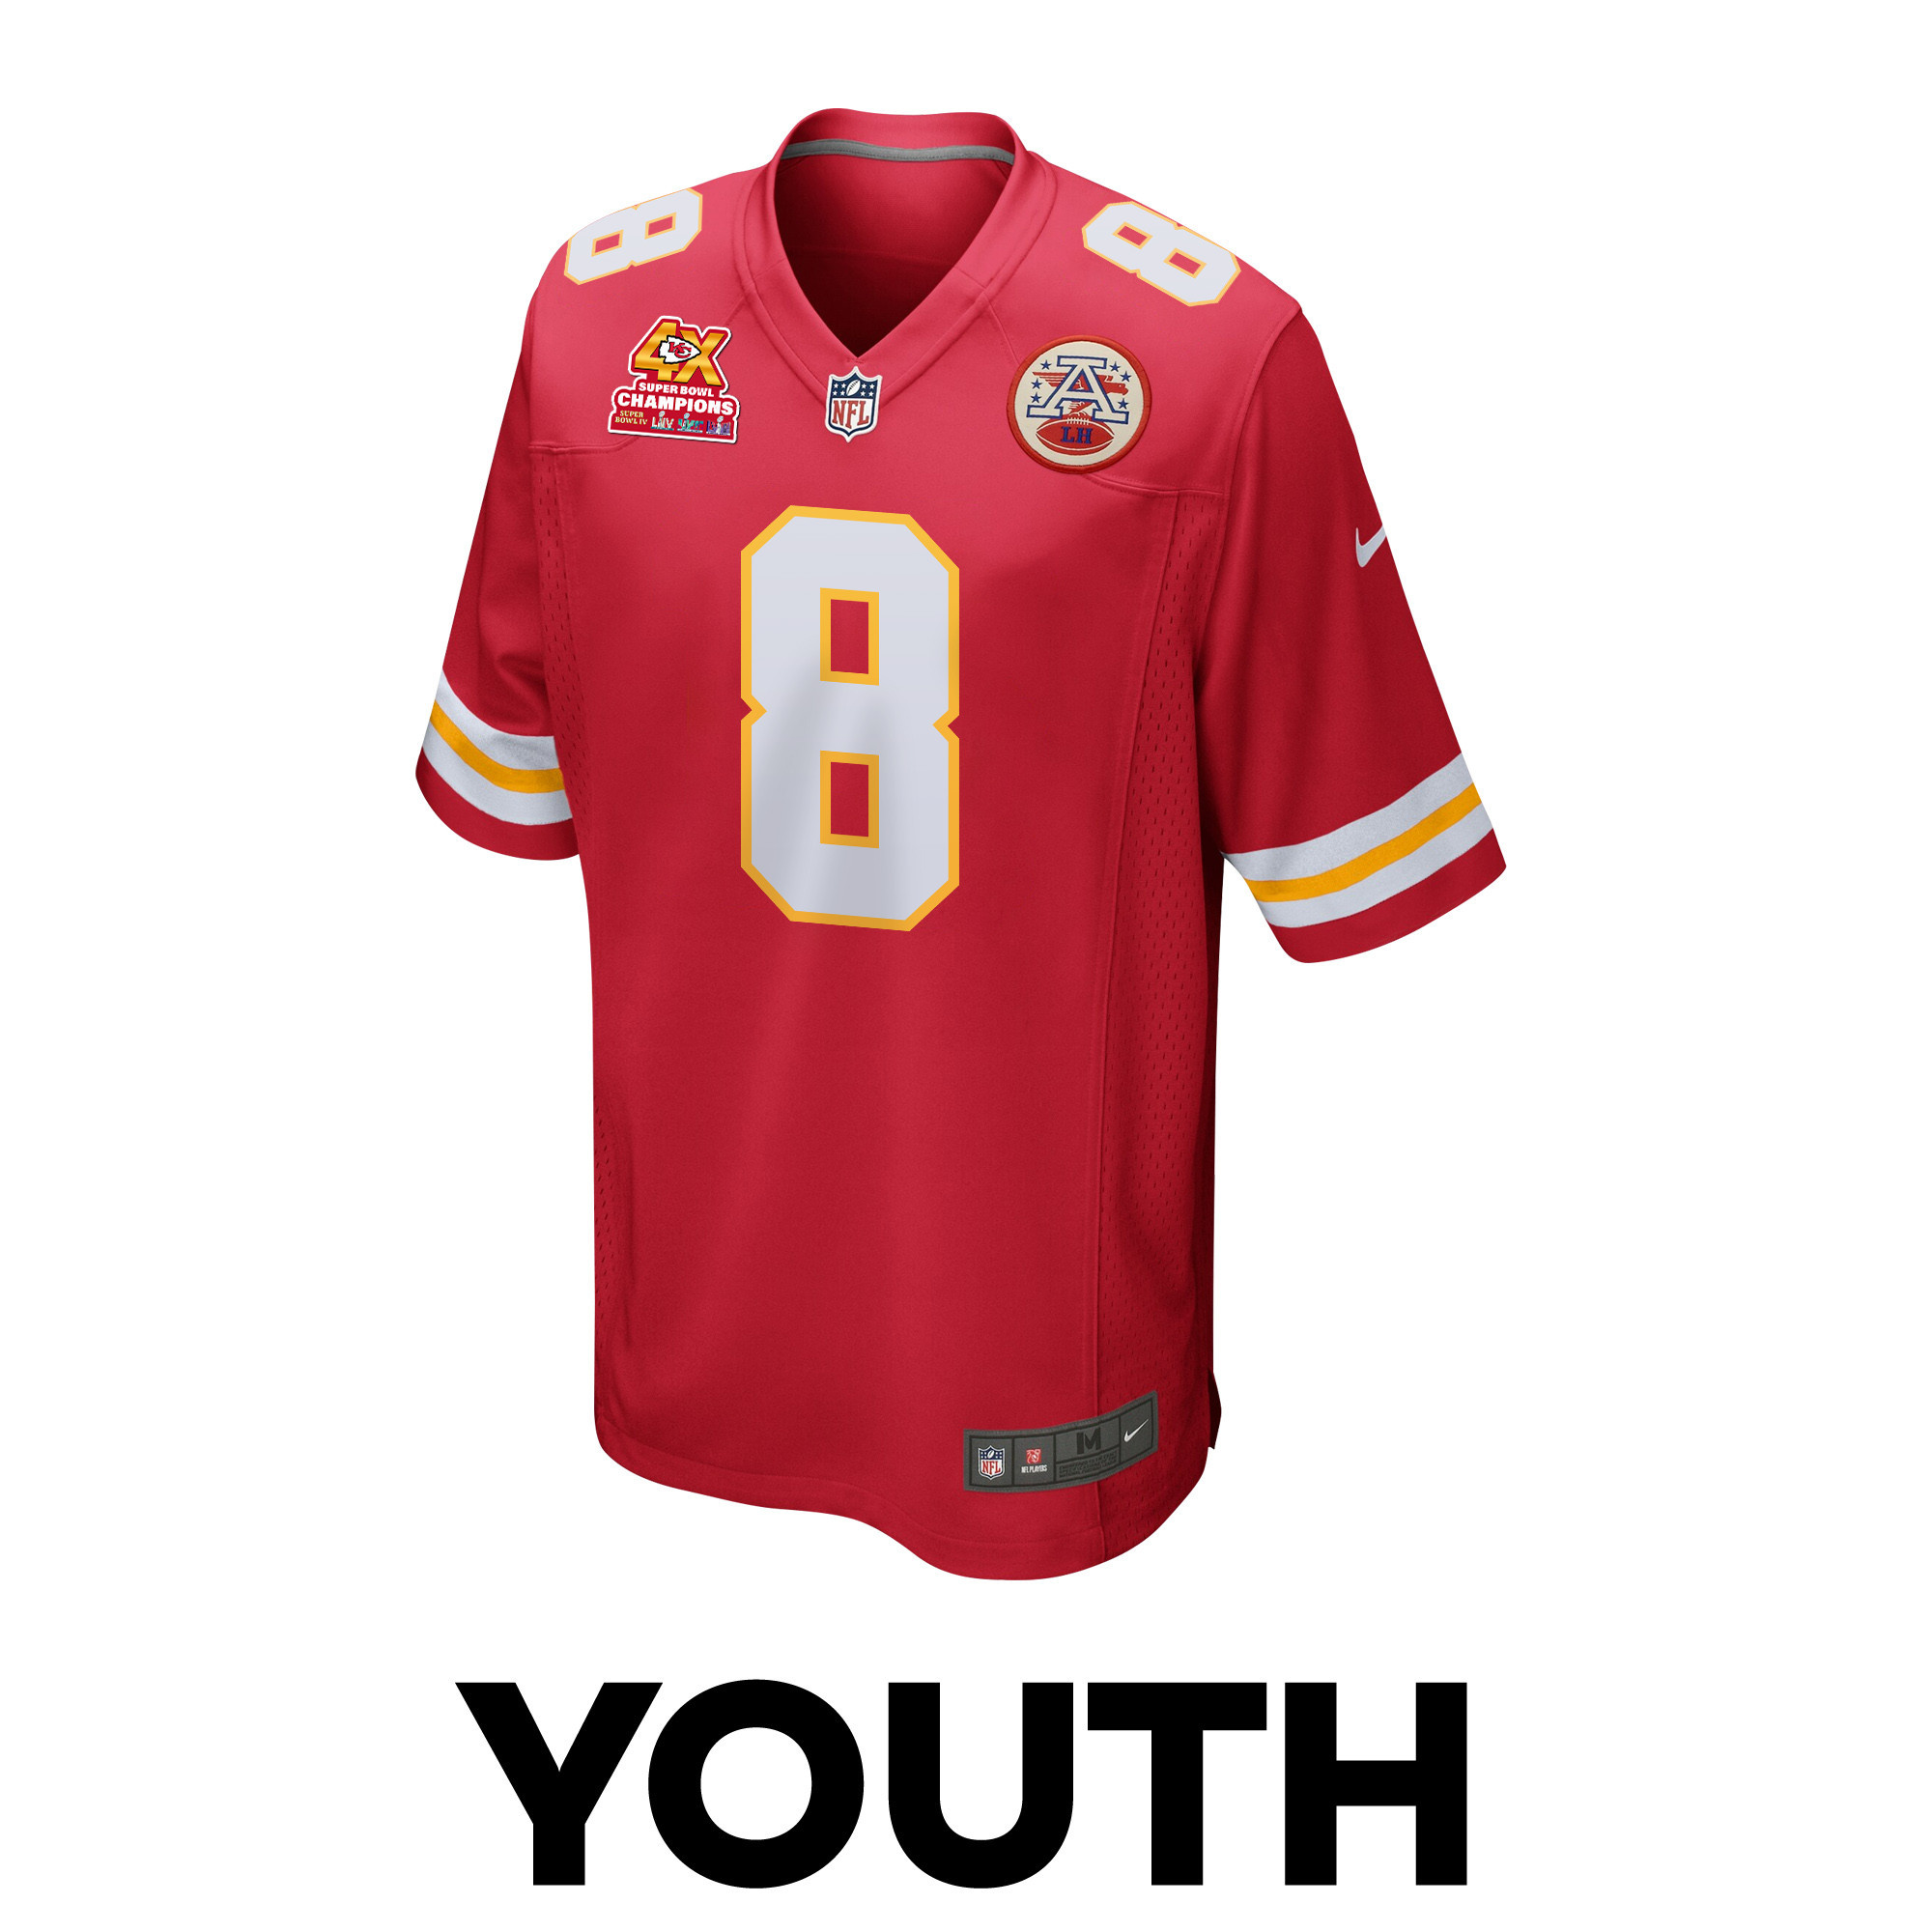 Justyn Ross 8 Kansas City Chiefs Super Bowl LVIII Champions 4X Game YOUTH Jersey - Red